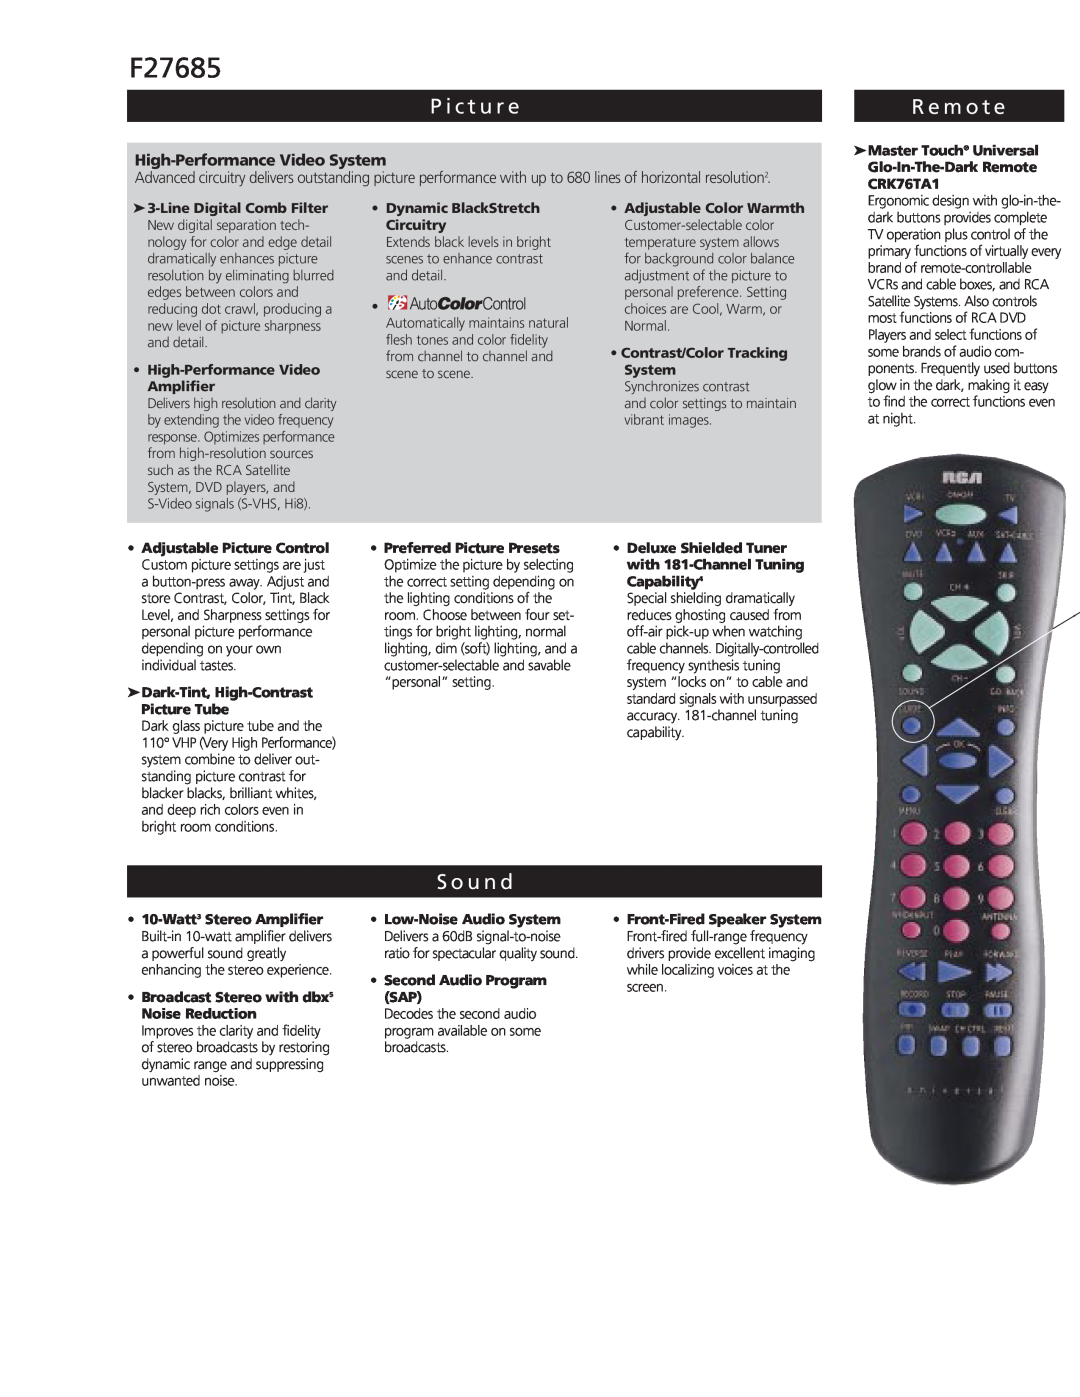 RCA F27685 manual P i c t u r e, R e m o t e, S o u n d, High-Performance Video System 